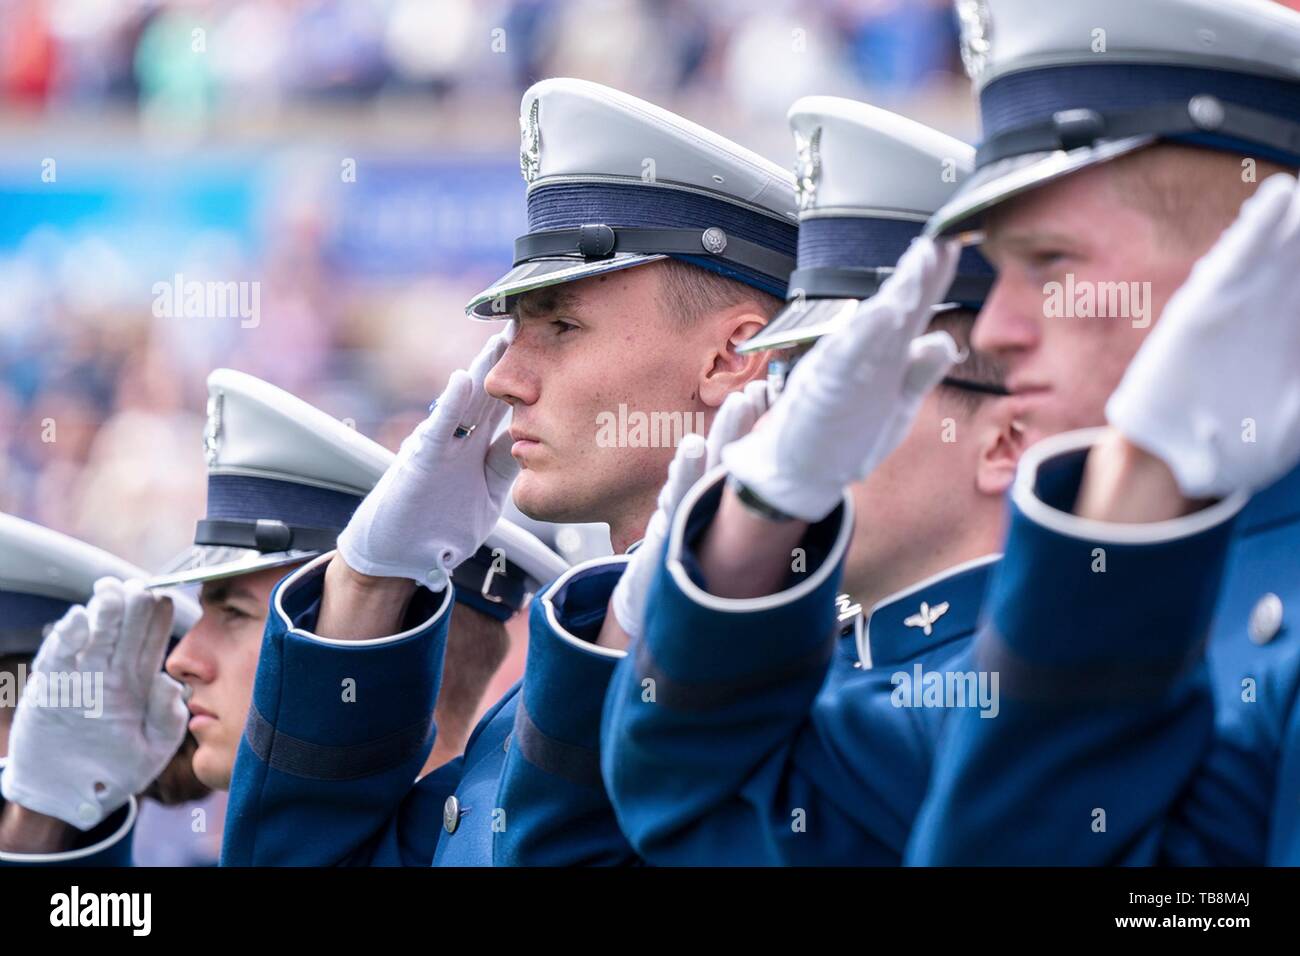 Colorado Springs, Colorado, USA. 30th May, 2019. U.S Air Force Academy cadets salute as they are commissioned during the Graduation Ceremony at the USAF Academy Falcon Stadium May 30, 2019 in Colorado Springs, Colorado. Credit: Planetpix/Alamy Live News Stock Photo